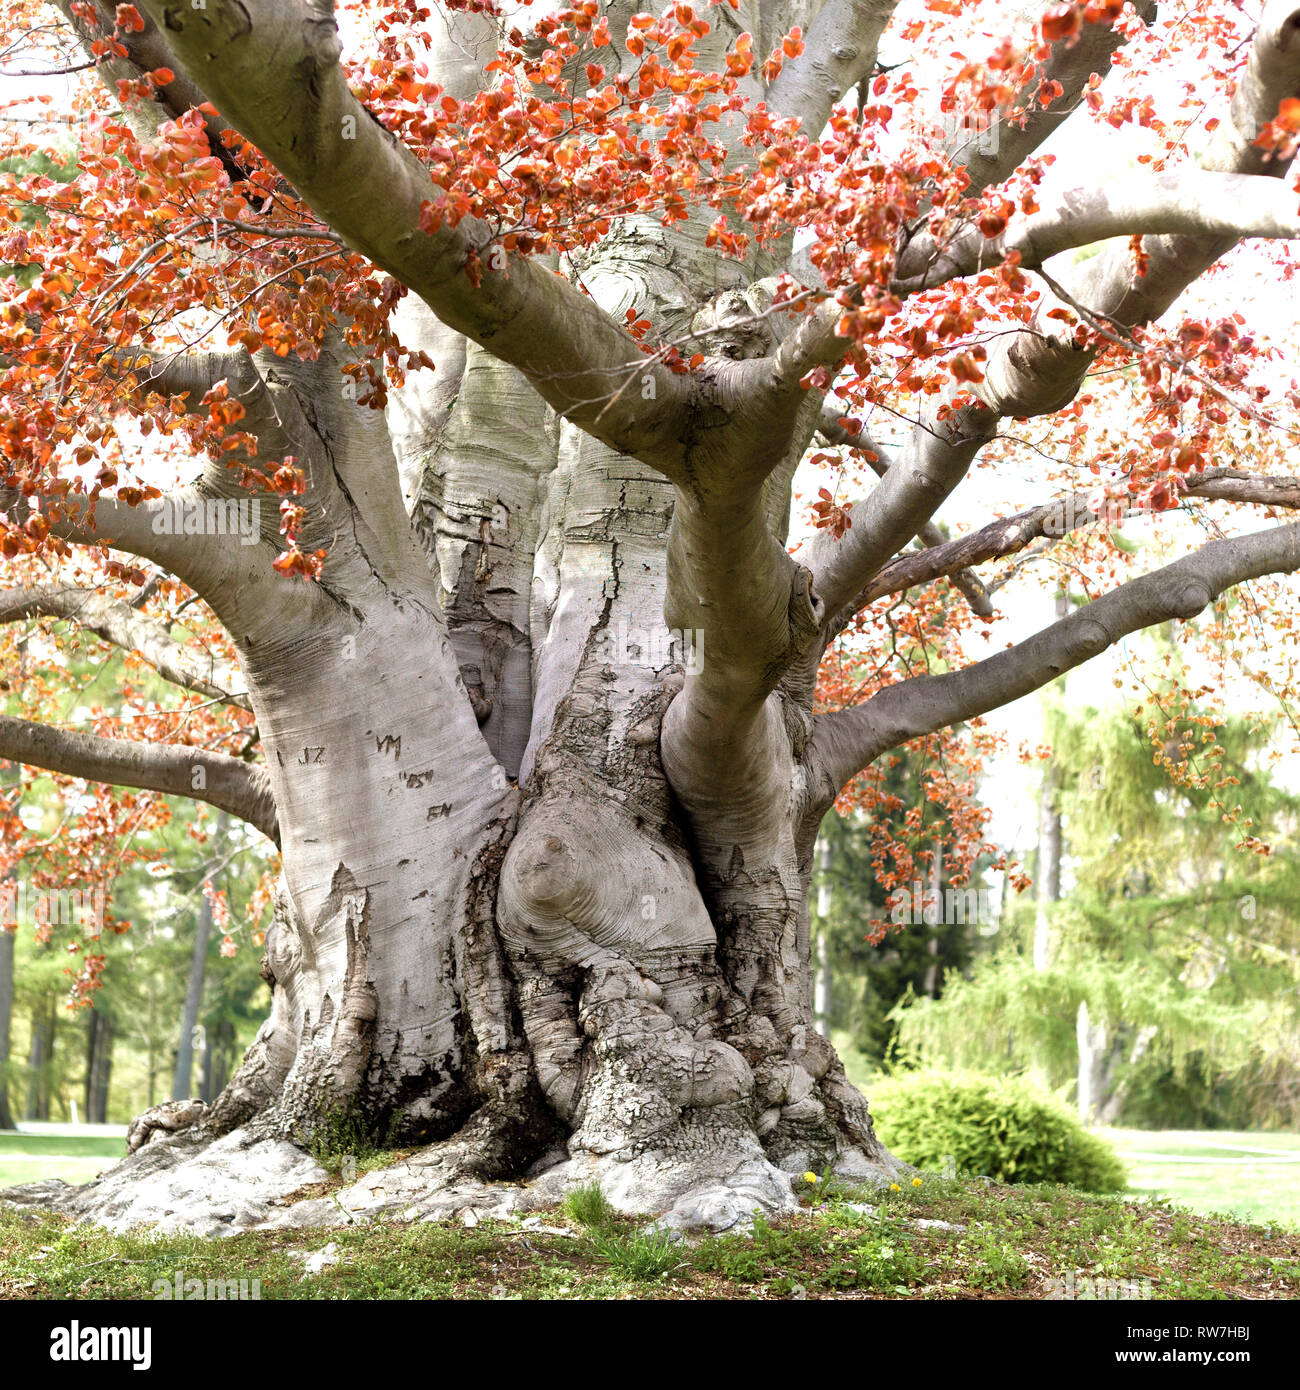 Large Trunk of Copper Beech Tree Stock Photo